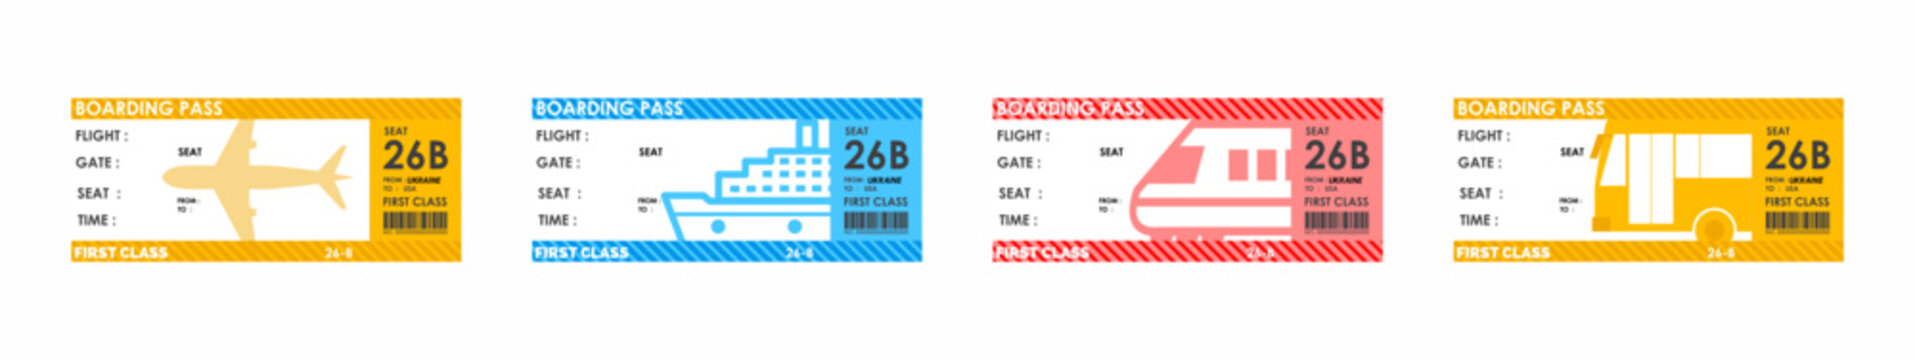 set of travel ticket icons for different types of transport such as airplane, cruise liner or ship, train and bus, multi-colored travel tickets on a white isolated background eps10